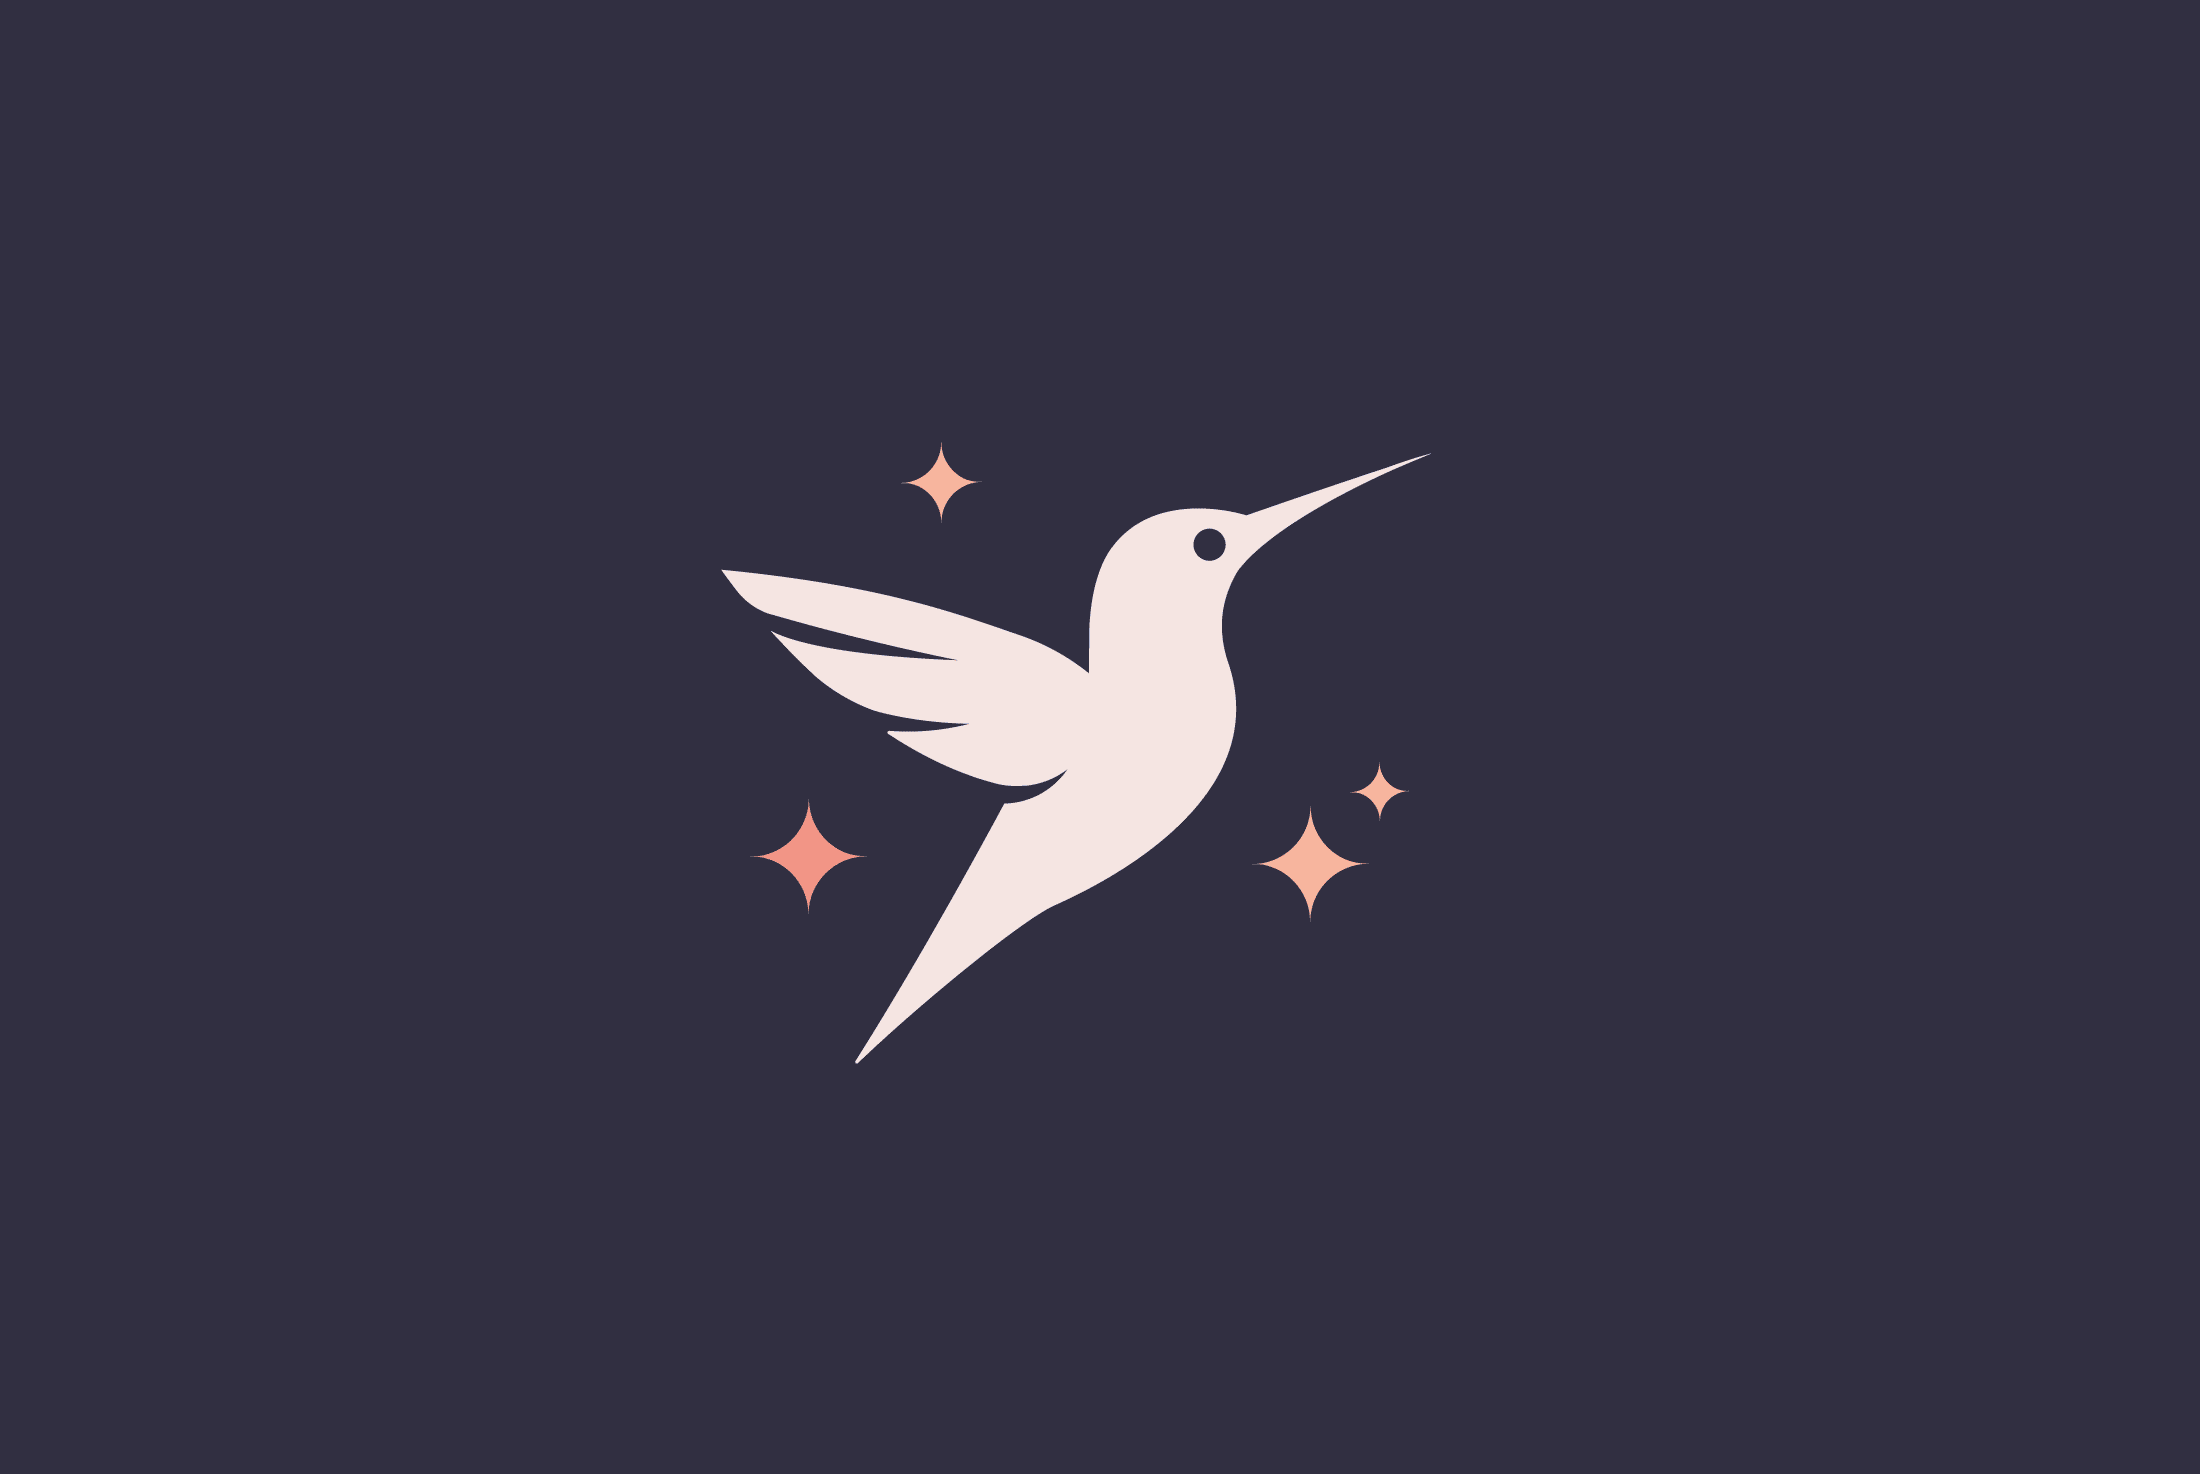 final flying hummingbird logo with four sparkles around it